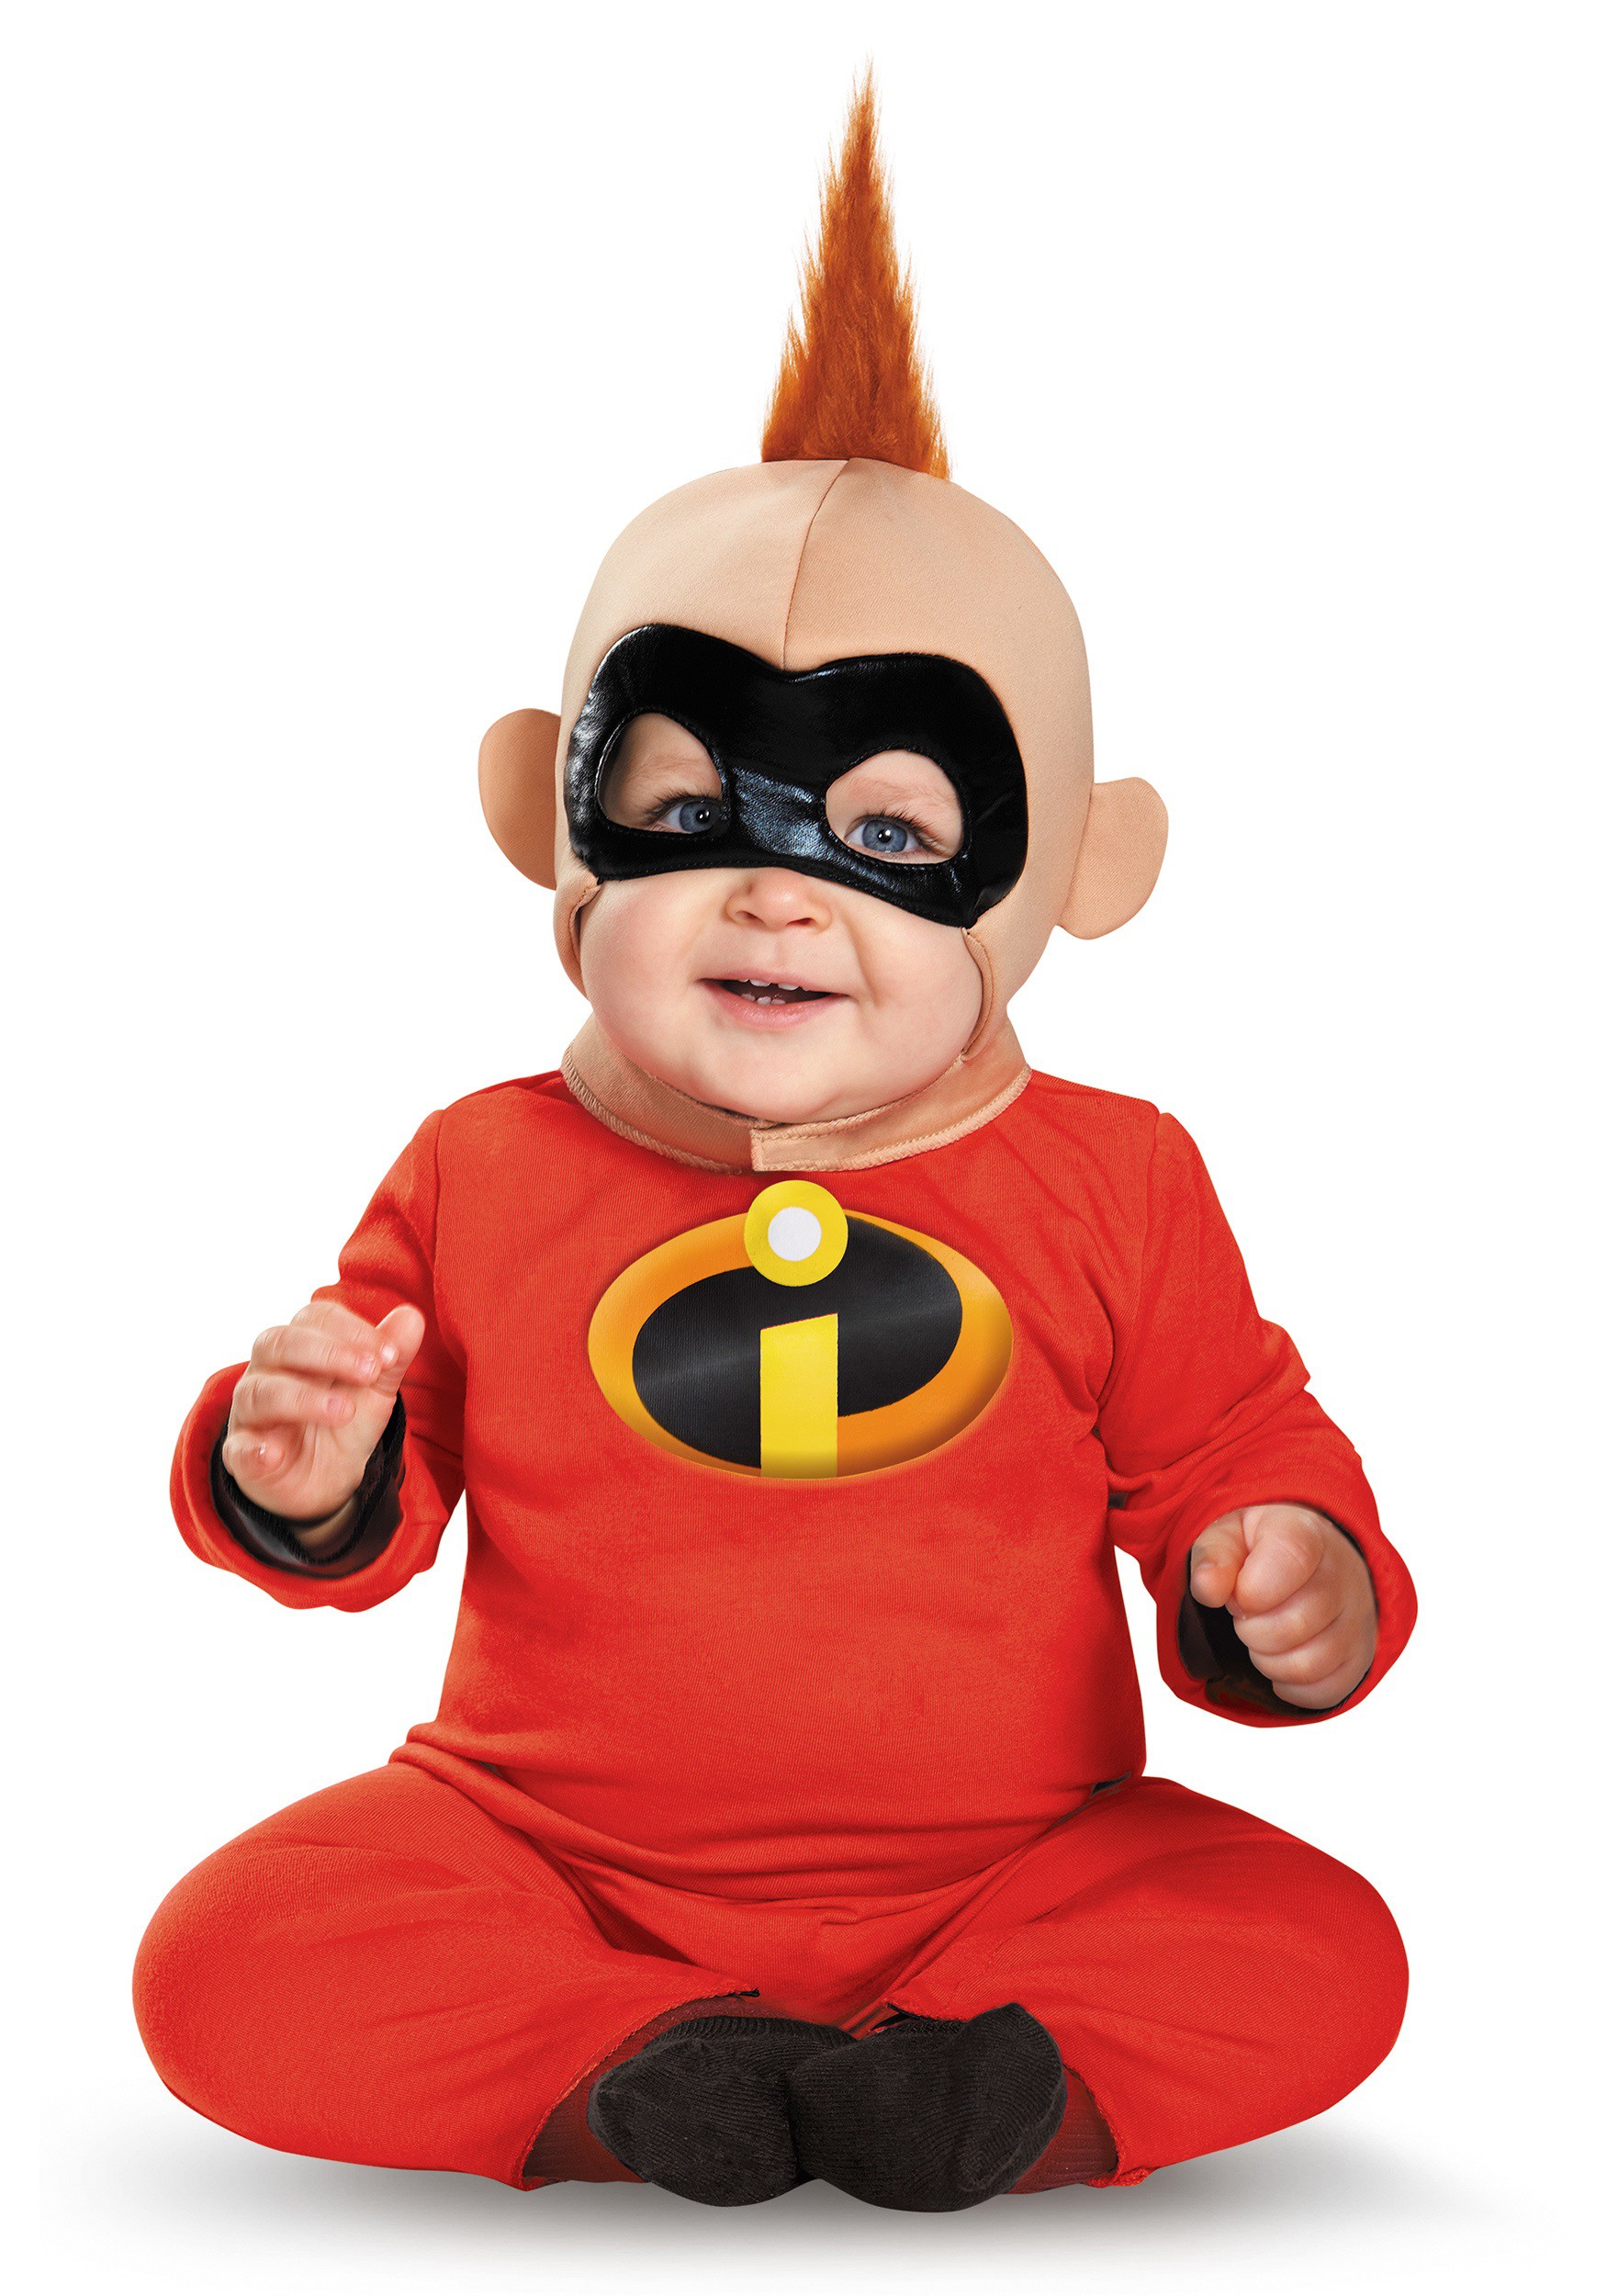 Photos - Fancy Dress JACK Disguise Baby   Deluxe Infant Costume - Incredibles Infant costume 